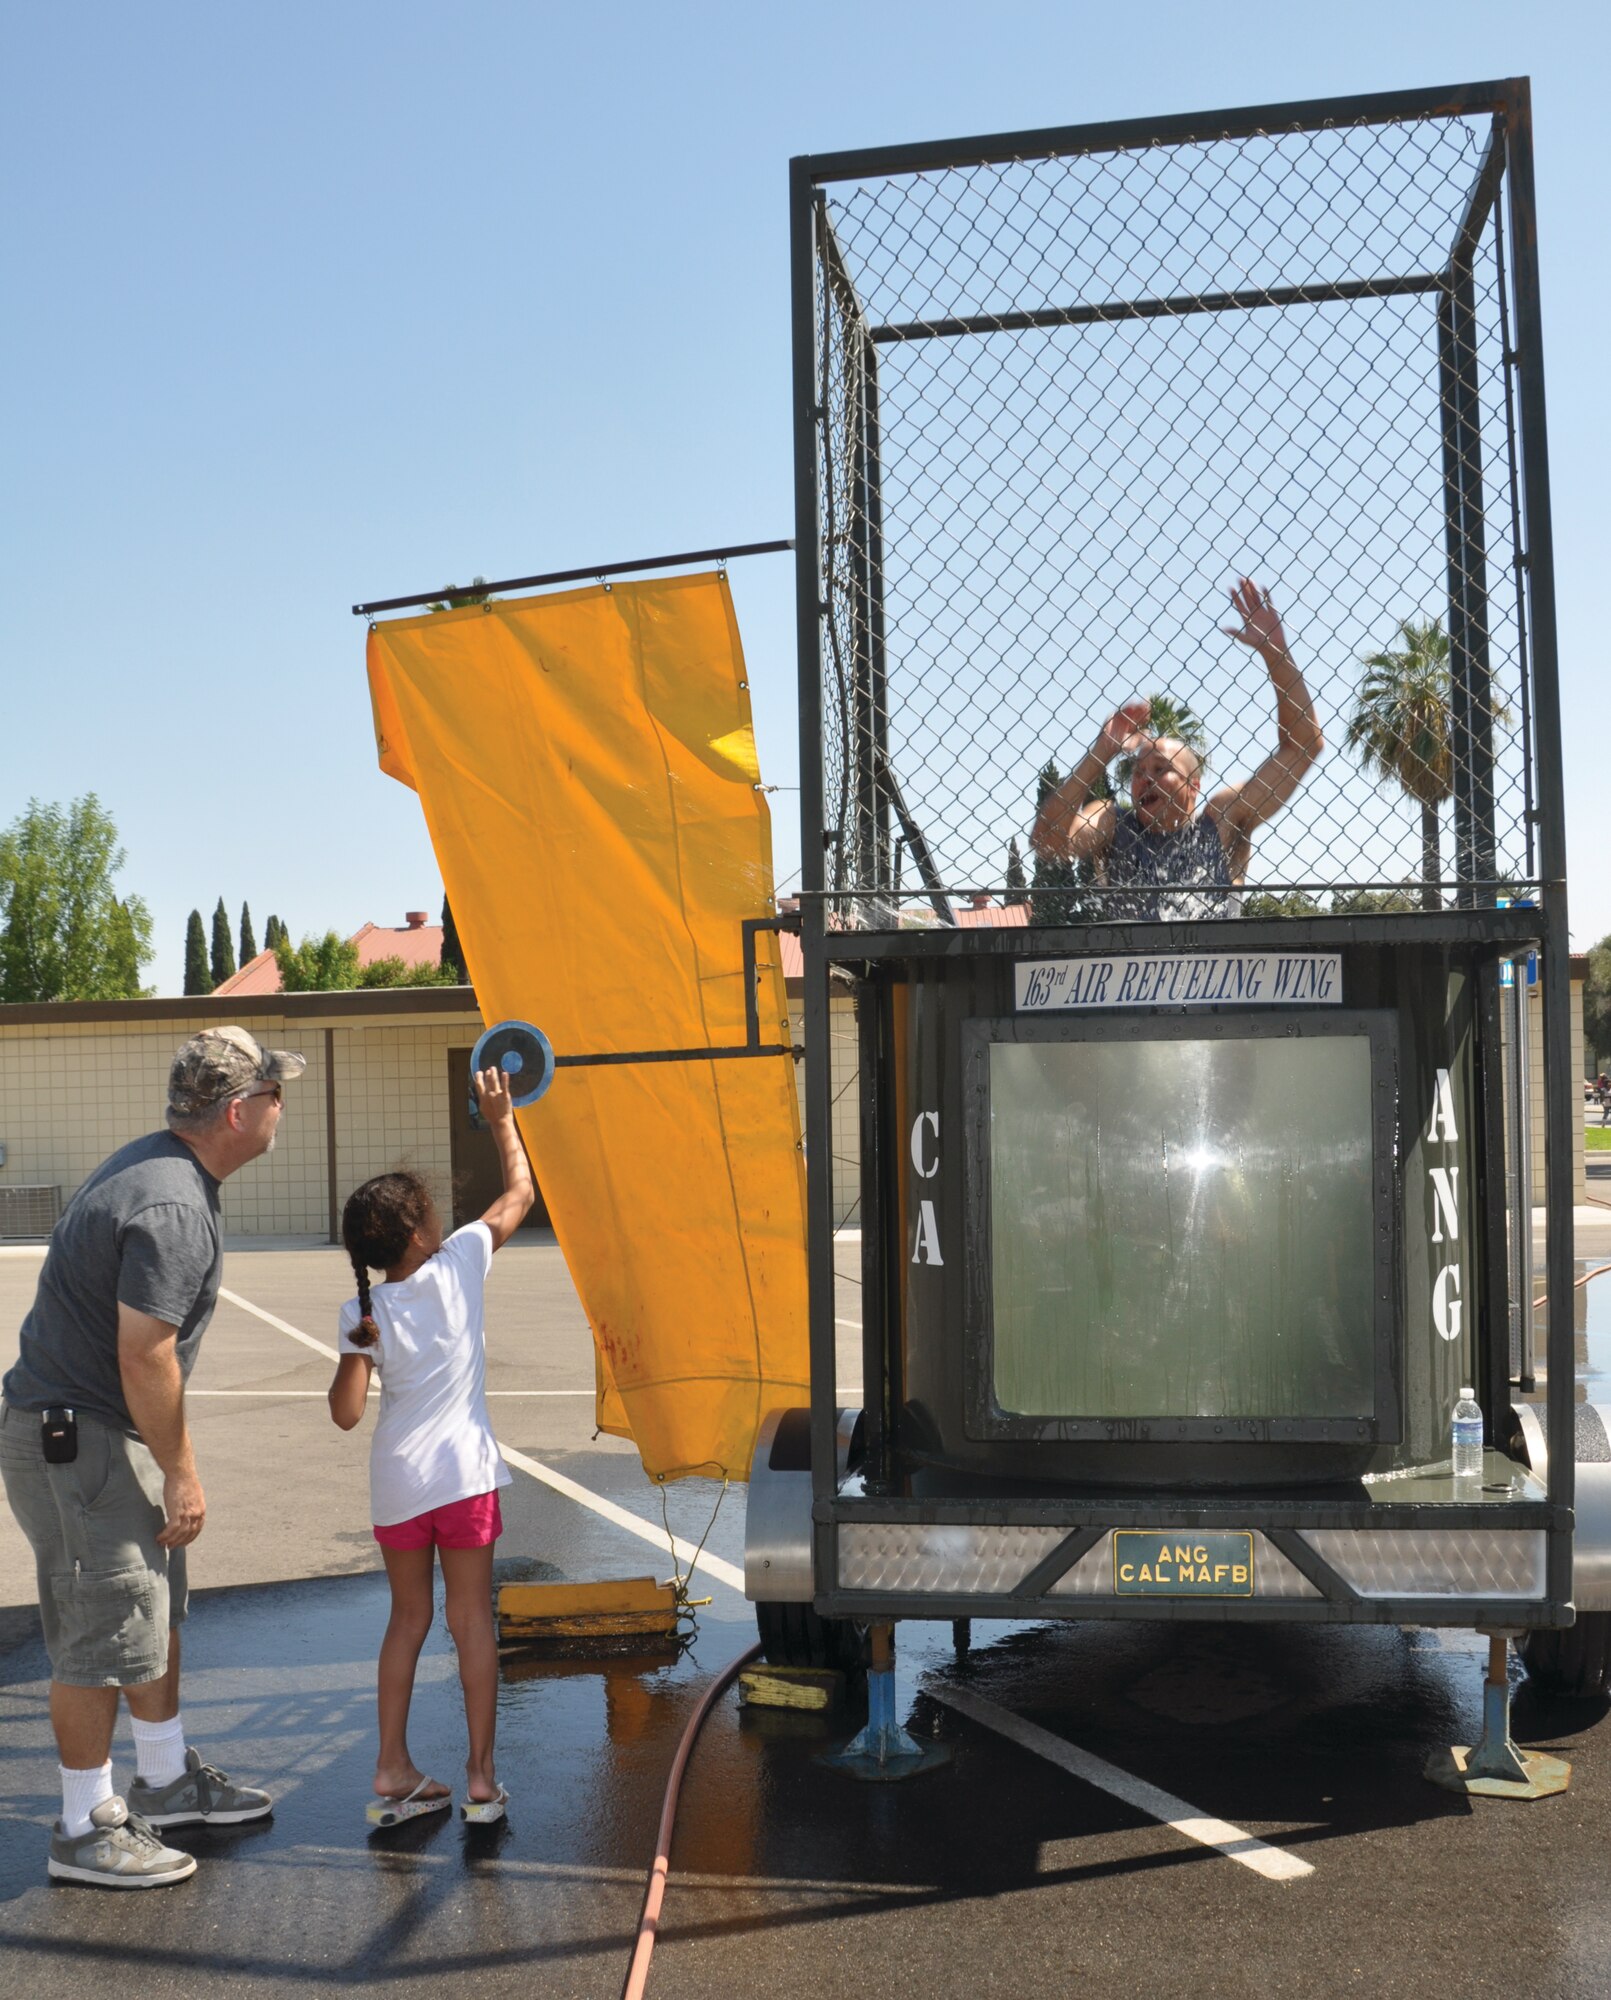 Fun in the dunk tank. (U.S. Air Force photo by Capt Ashley Norris)